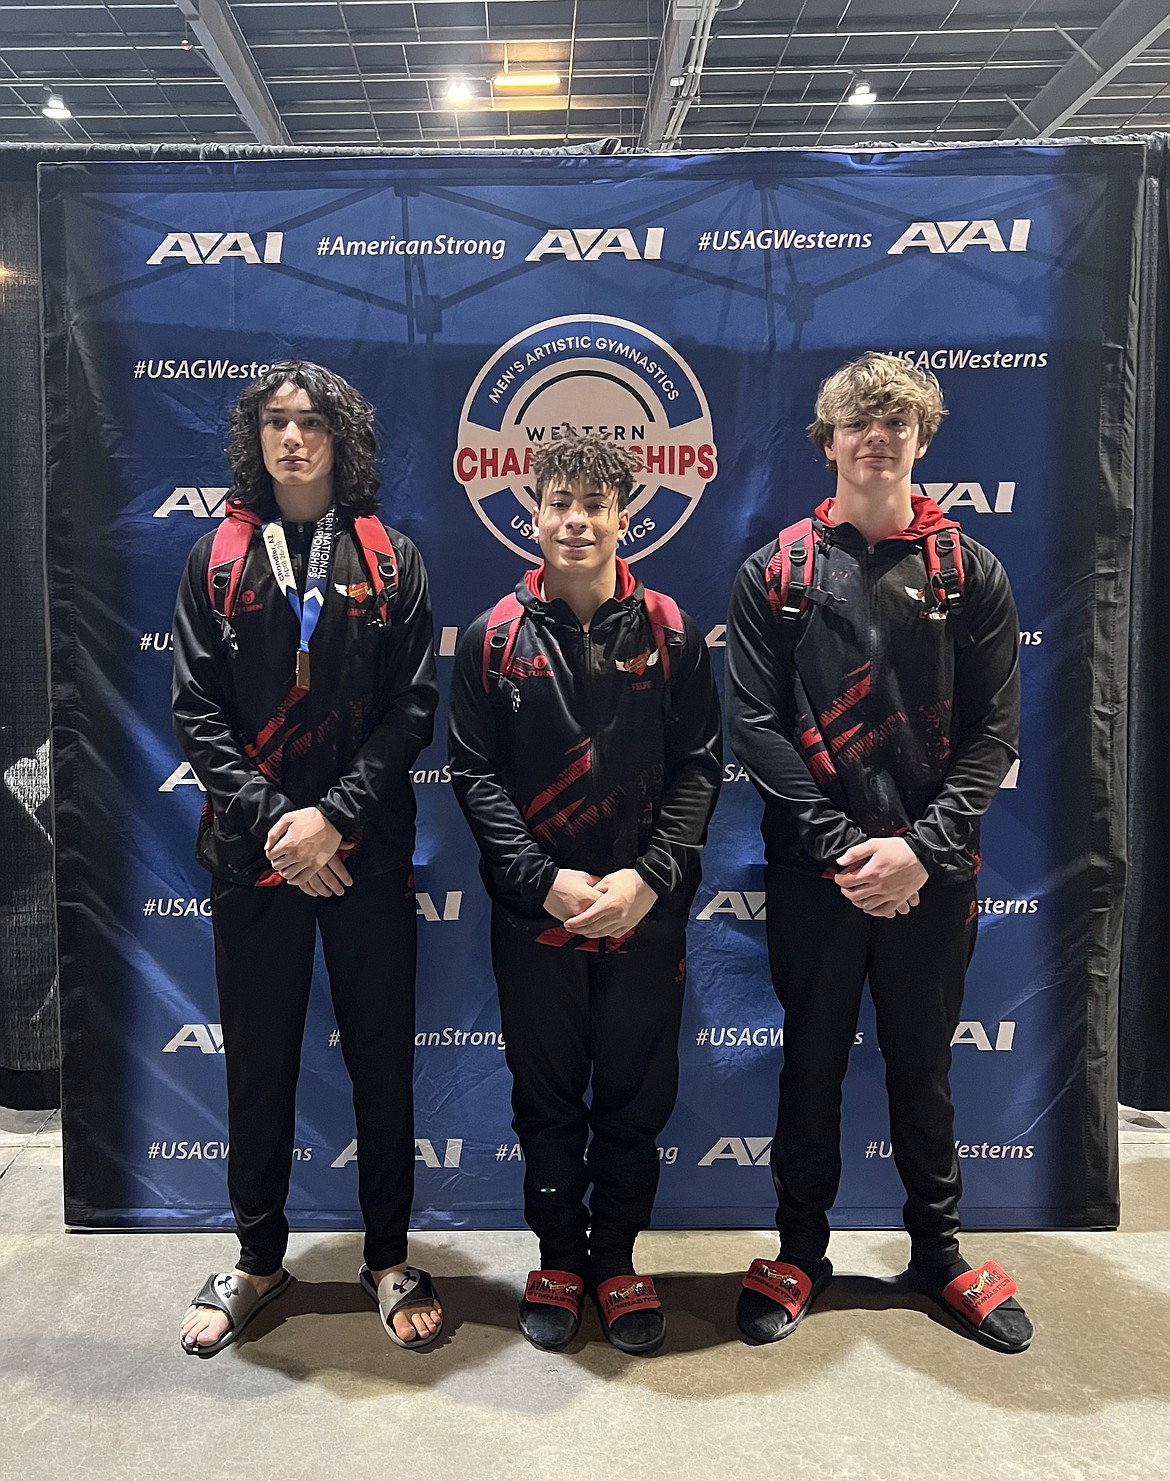 Courtesy photo
Avant Coeur Gymnastics Level 9s at the Western National Championships in Chandler, Ariz. From left are Grayson McKlendin, Felipe McAllister and Cayden Ptashkin.